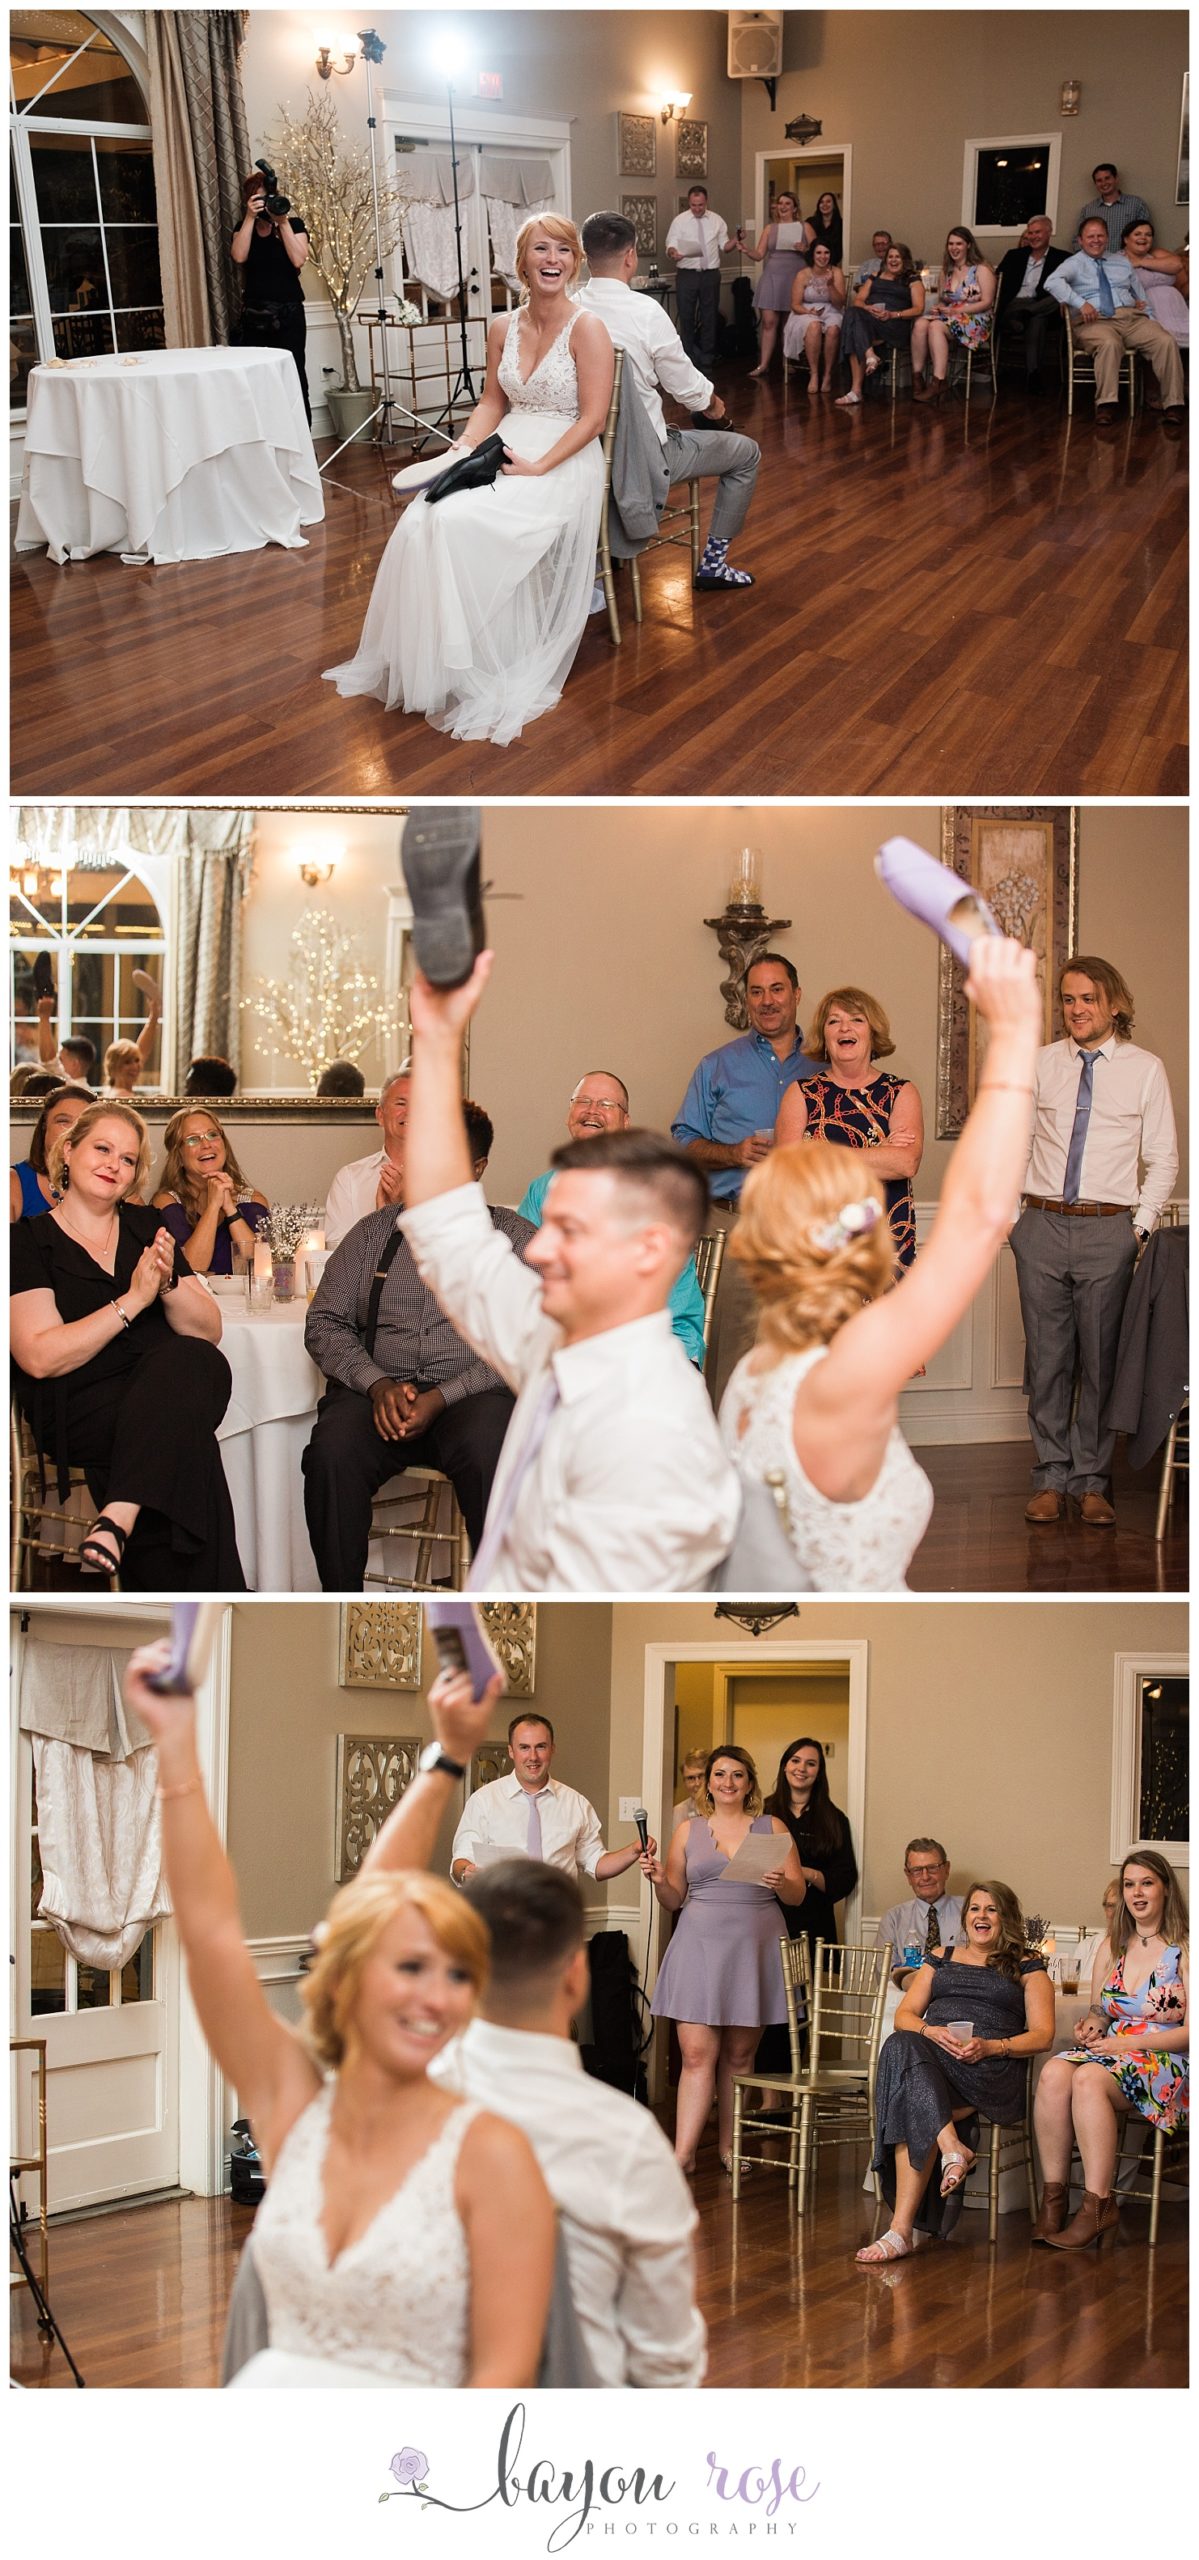 guest reactions to wedding shoe game